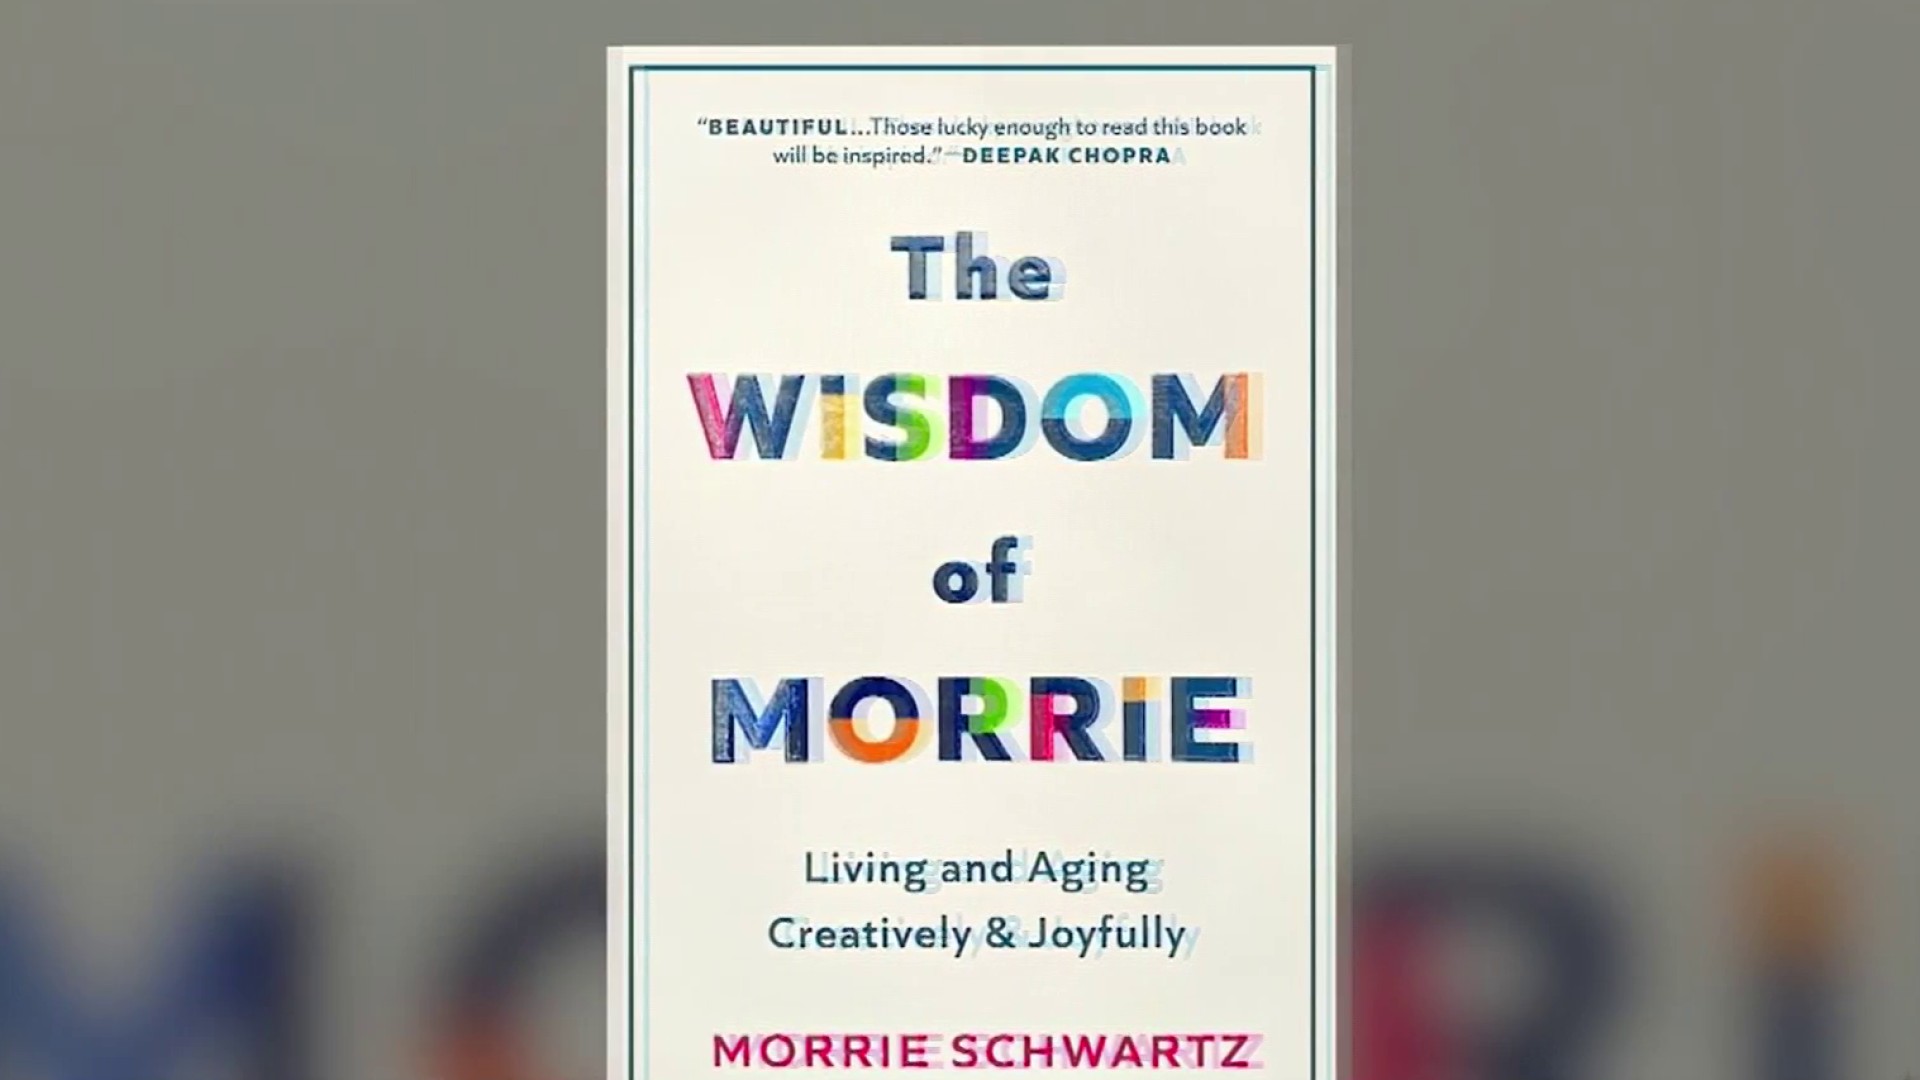 8 Precious lessons I learned from Tuesdays with Morrie – SheKnows